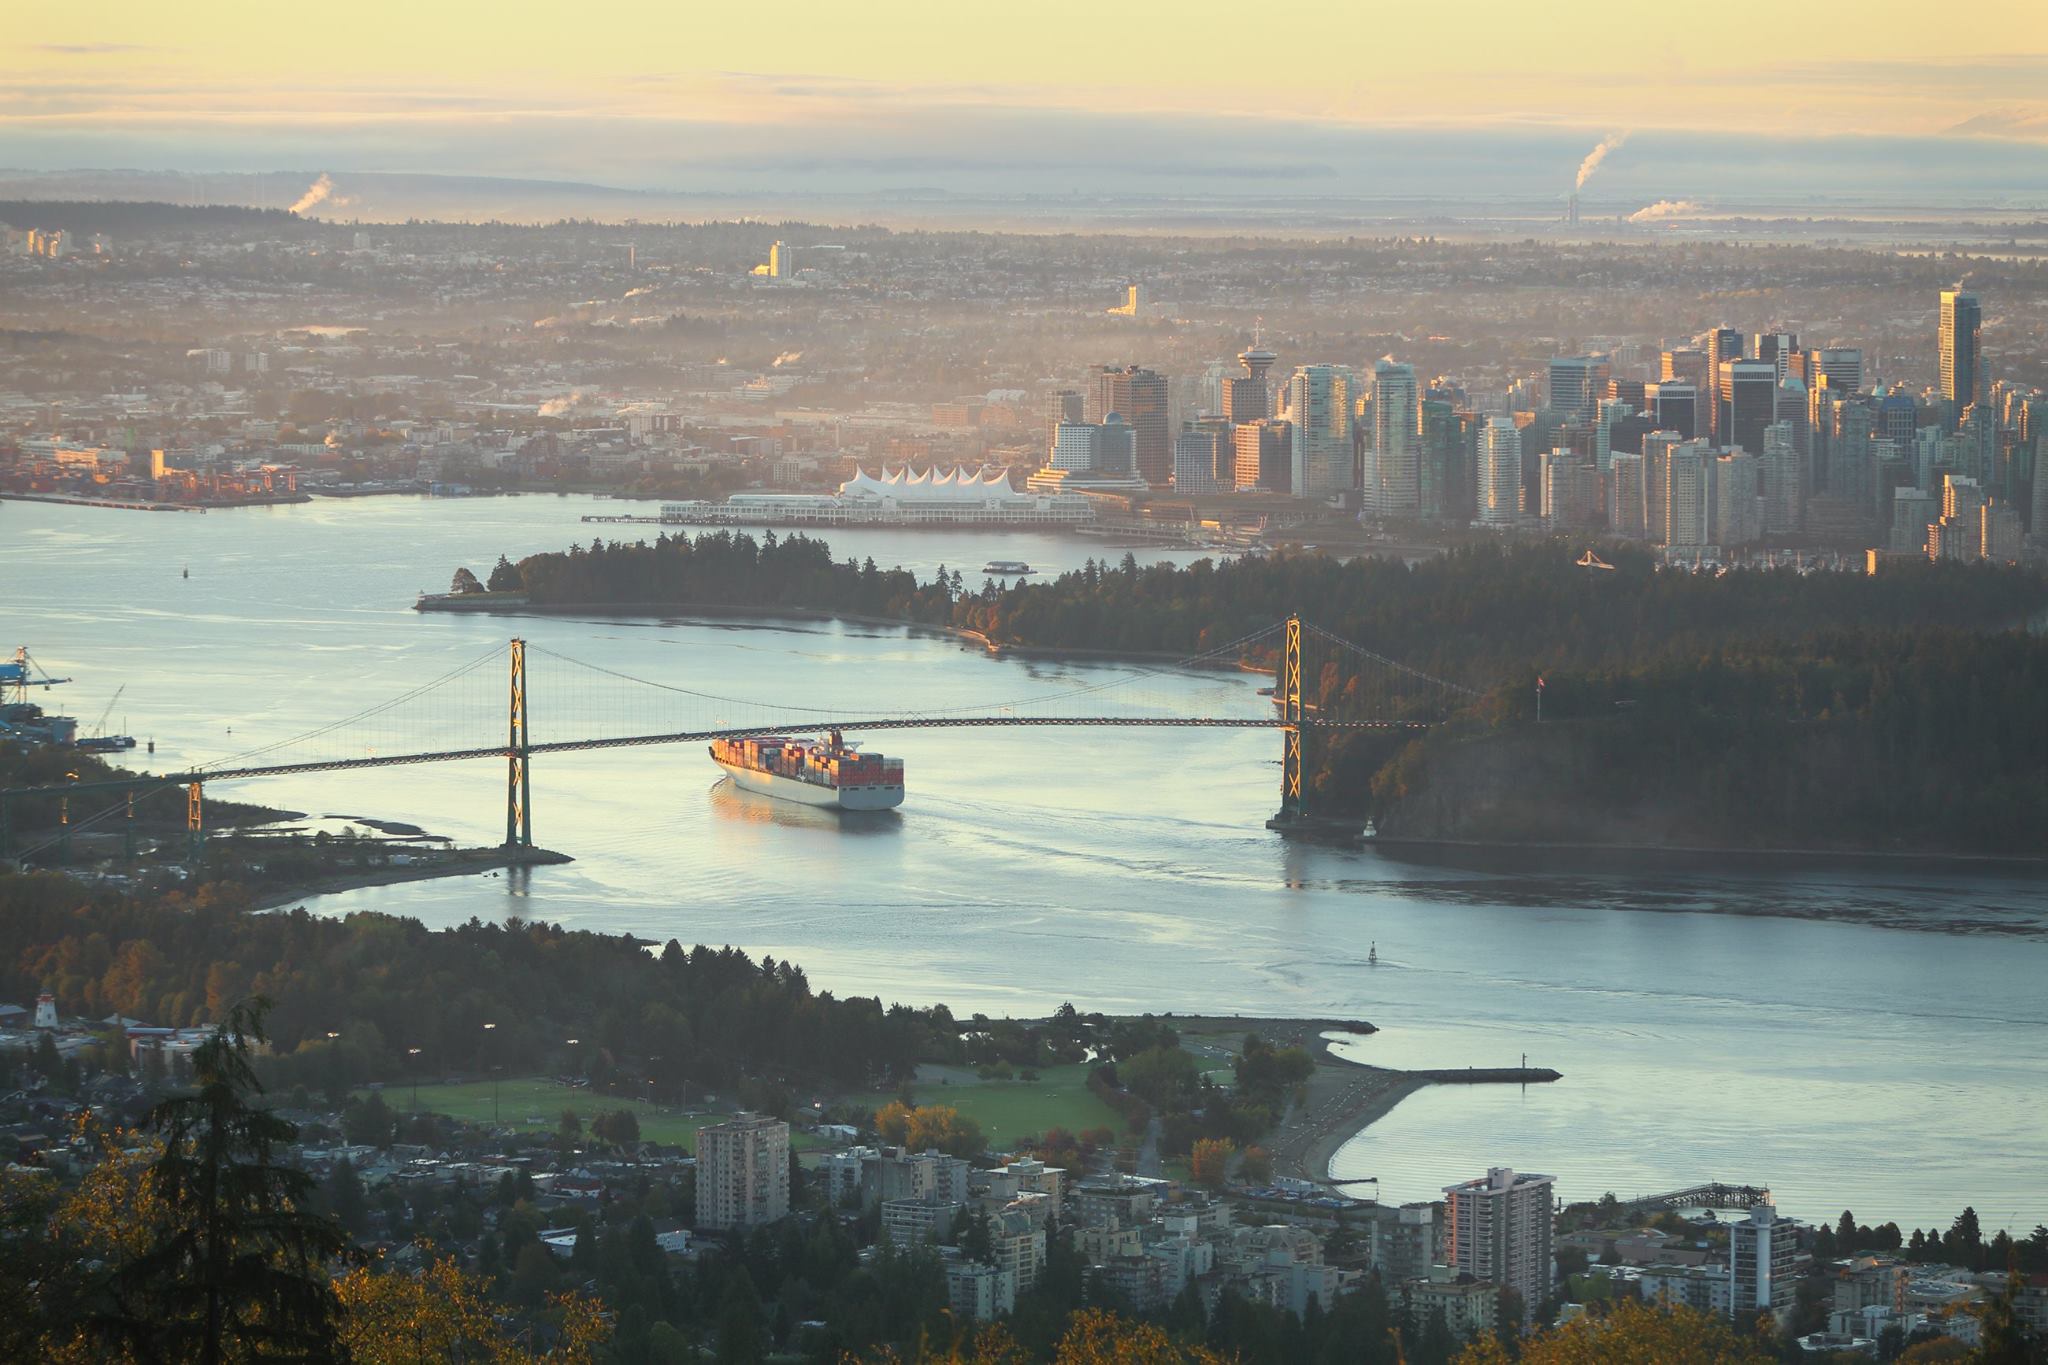 B.C. government joins the Vancouver Fraser Port Authority and FortisBC to establish the first STS LNG marine bunkering service on the west coast of North America